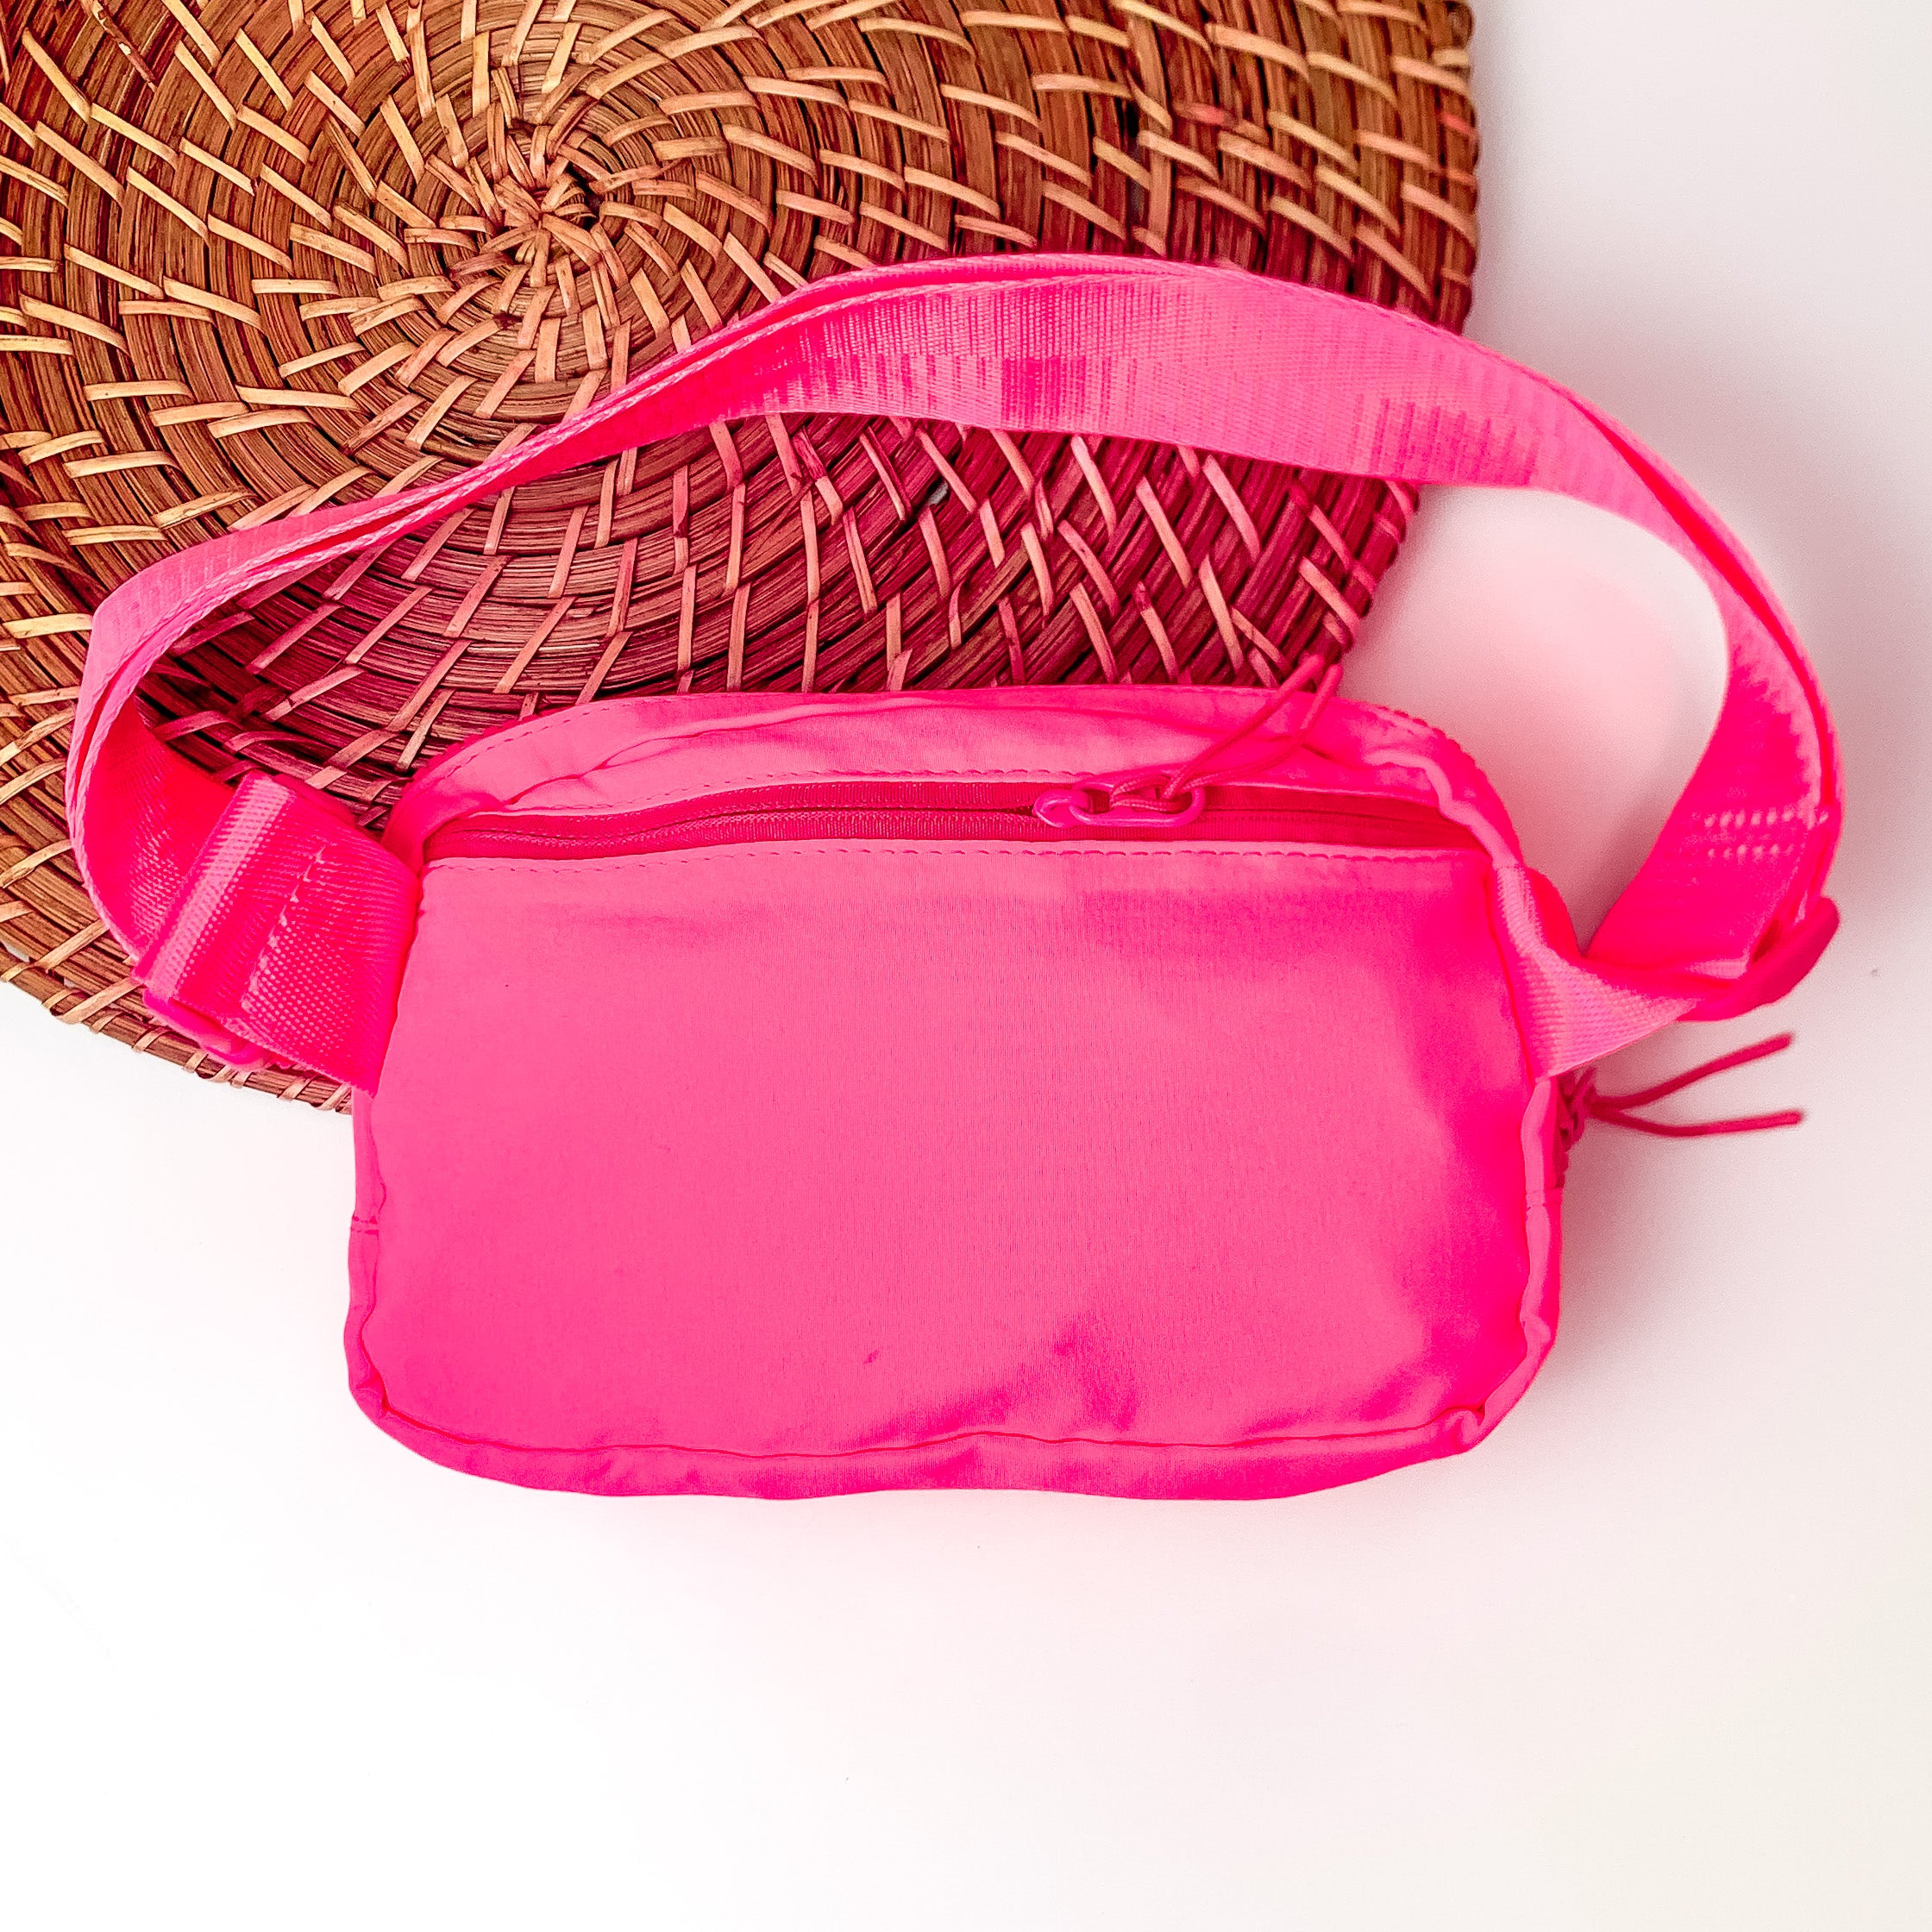 Love the Journey Fanny Pack in Neon Pink - Giddy Up Glamour Boutique